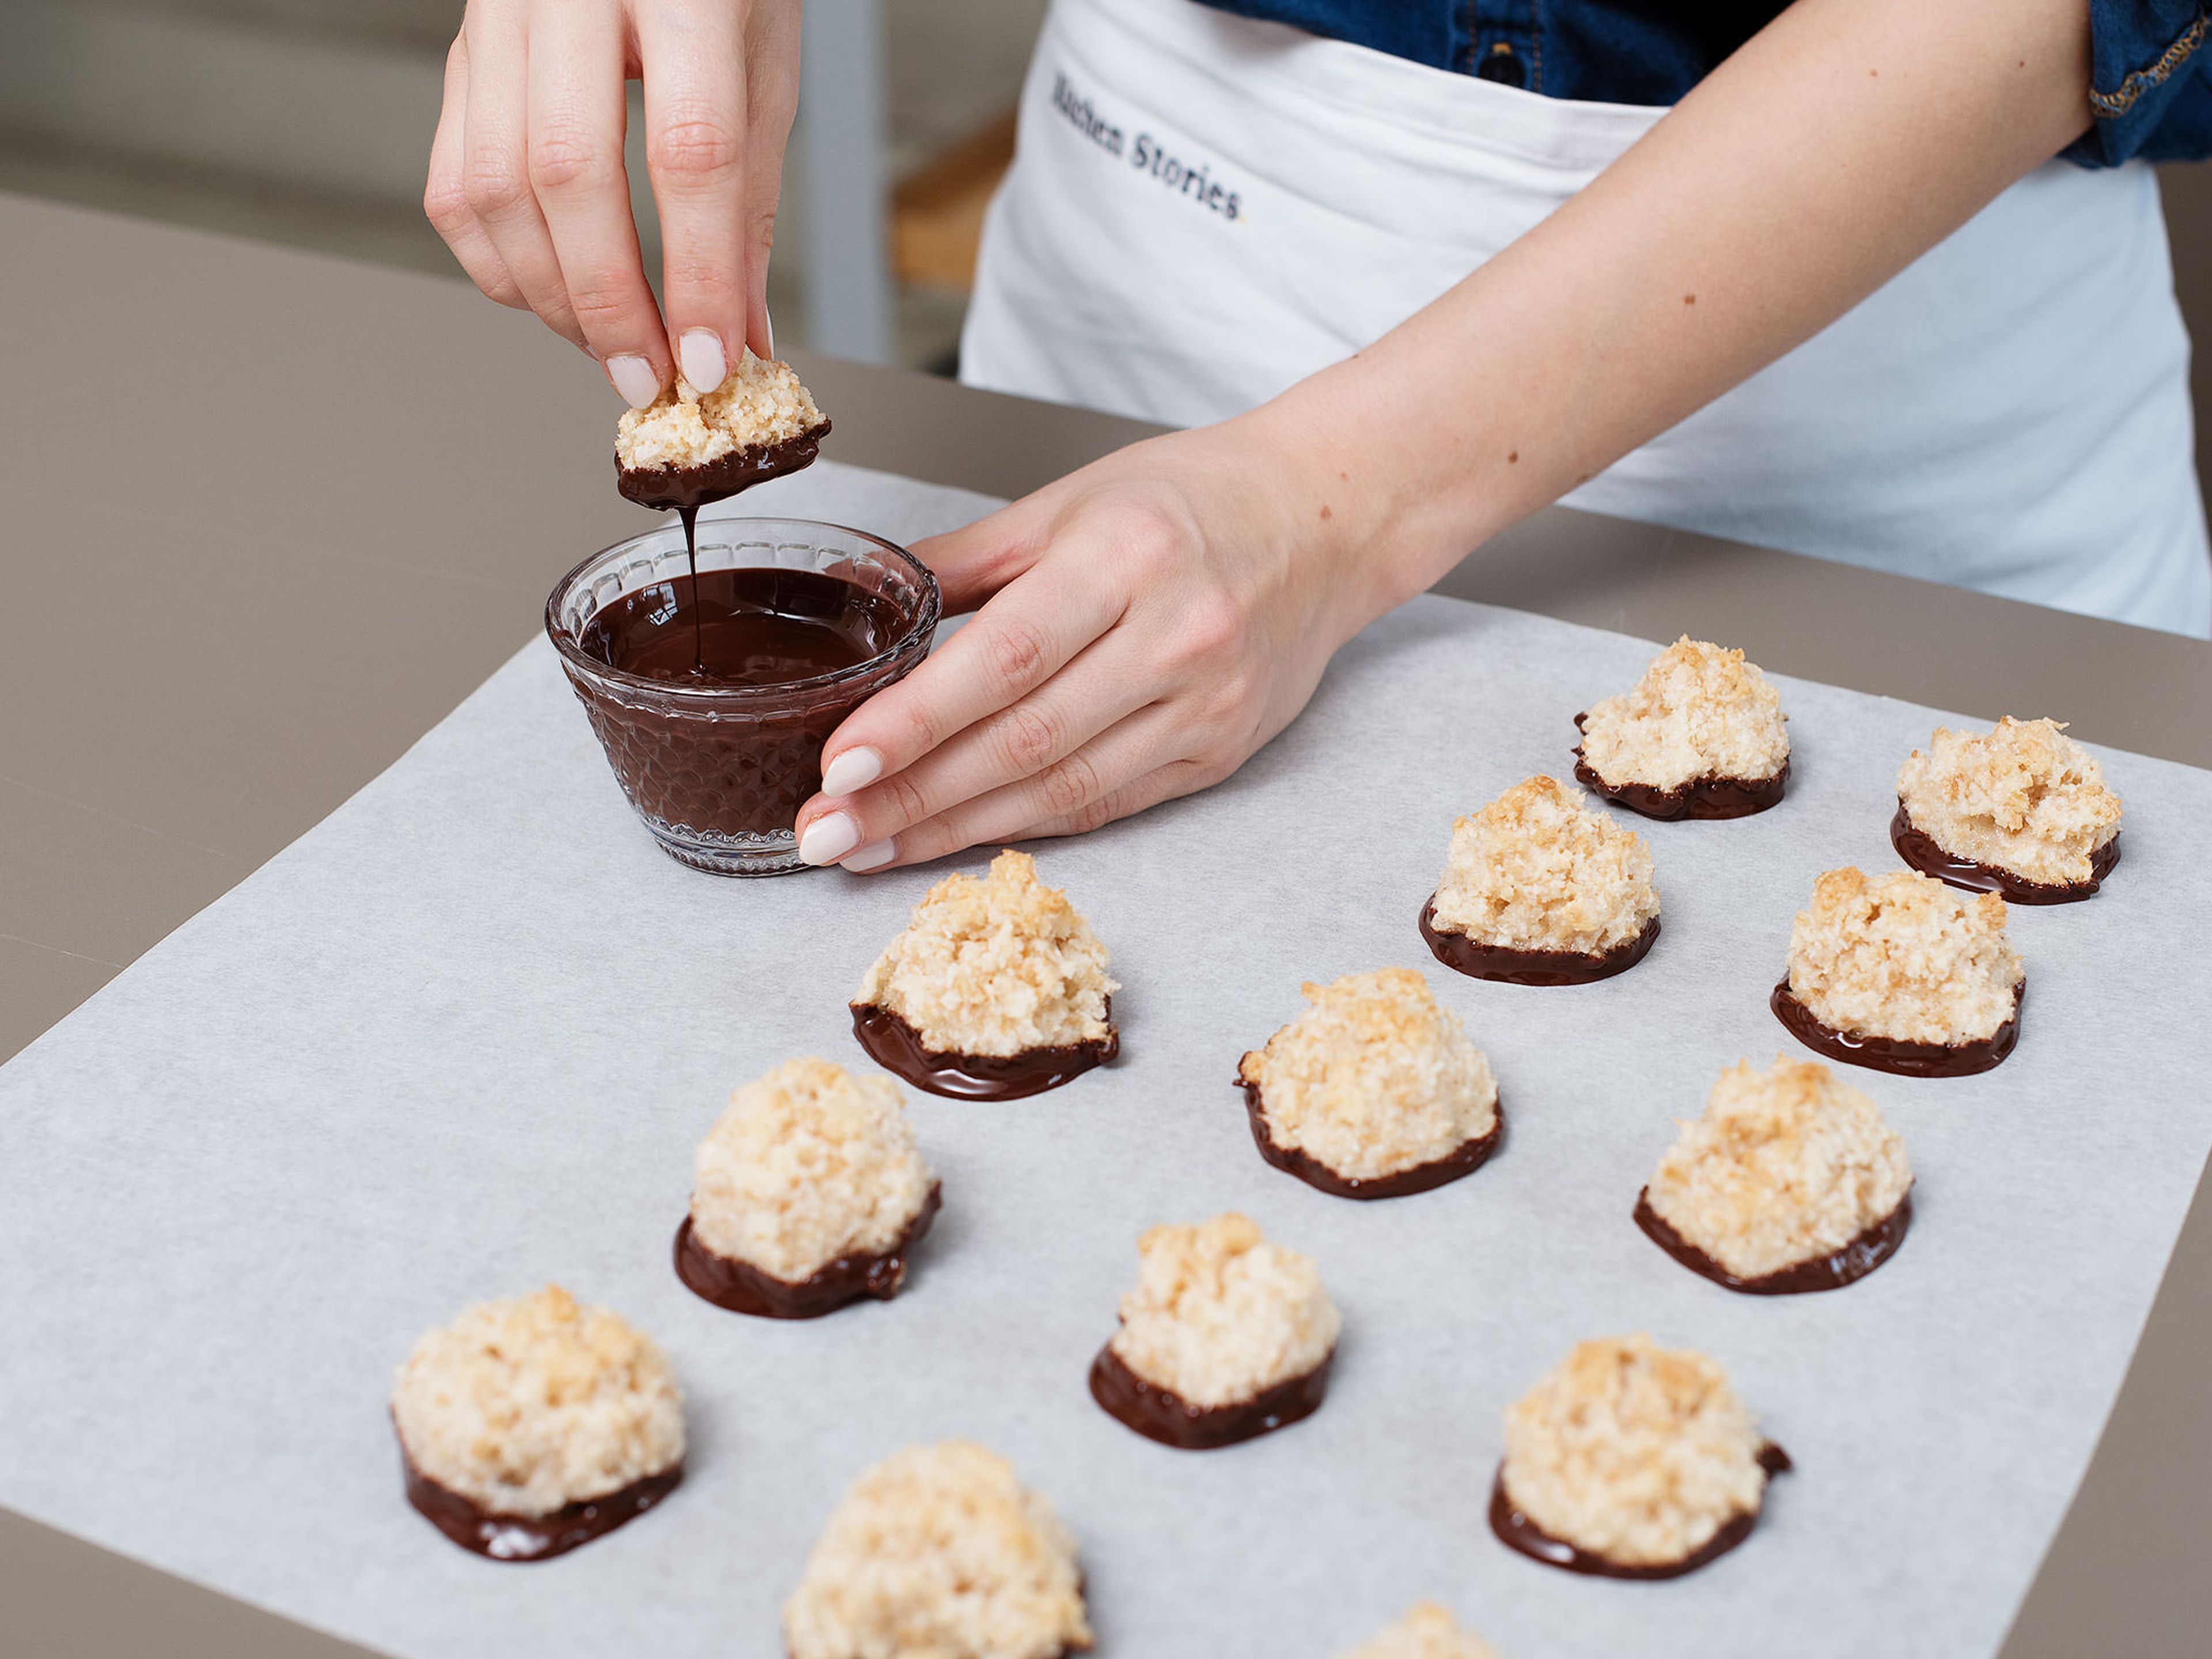 Break up chocolate and melt in a heatproof bowl set over a pot of simmering water. Carefully remove macaroons from baking paper and partially dip in chocolate. Place on parchment paper to dry for approx. 1 hr., then enjoy!